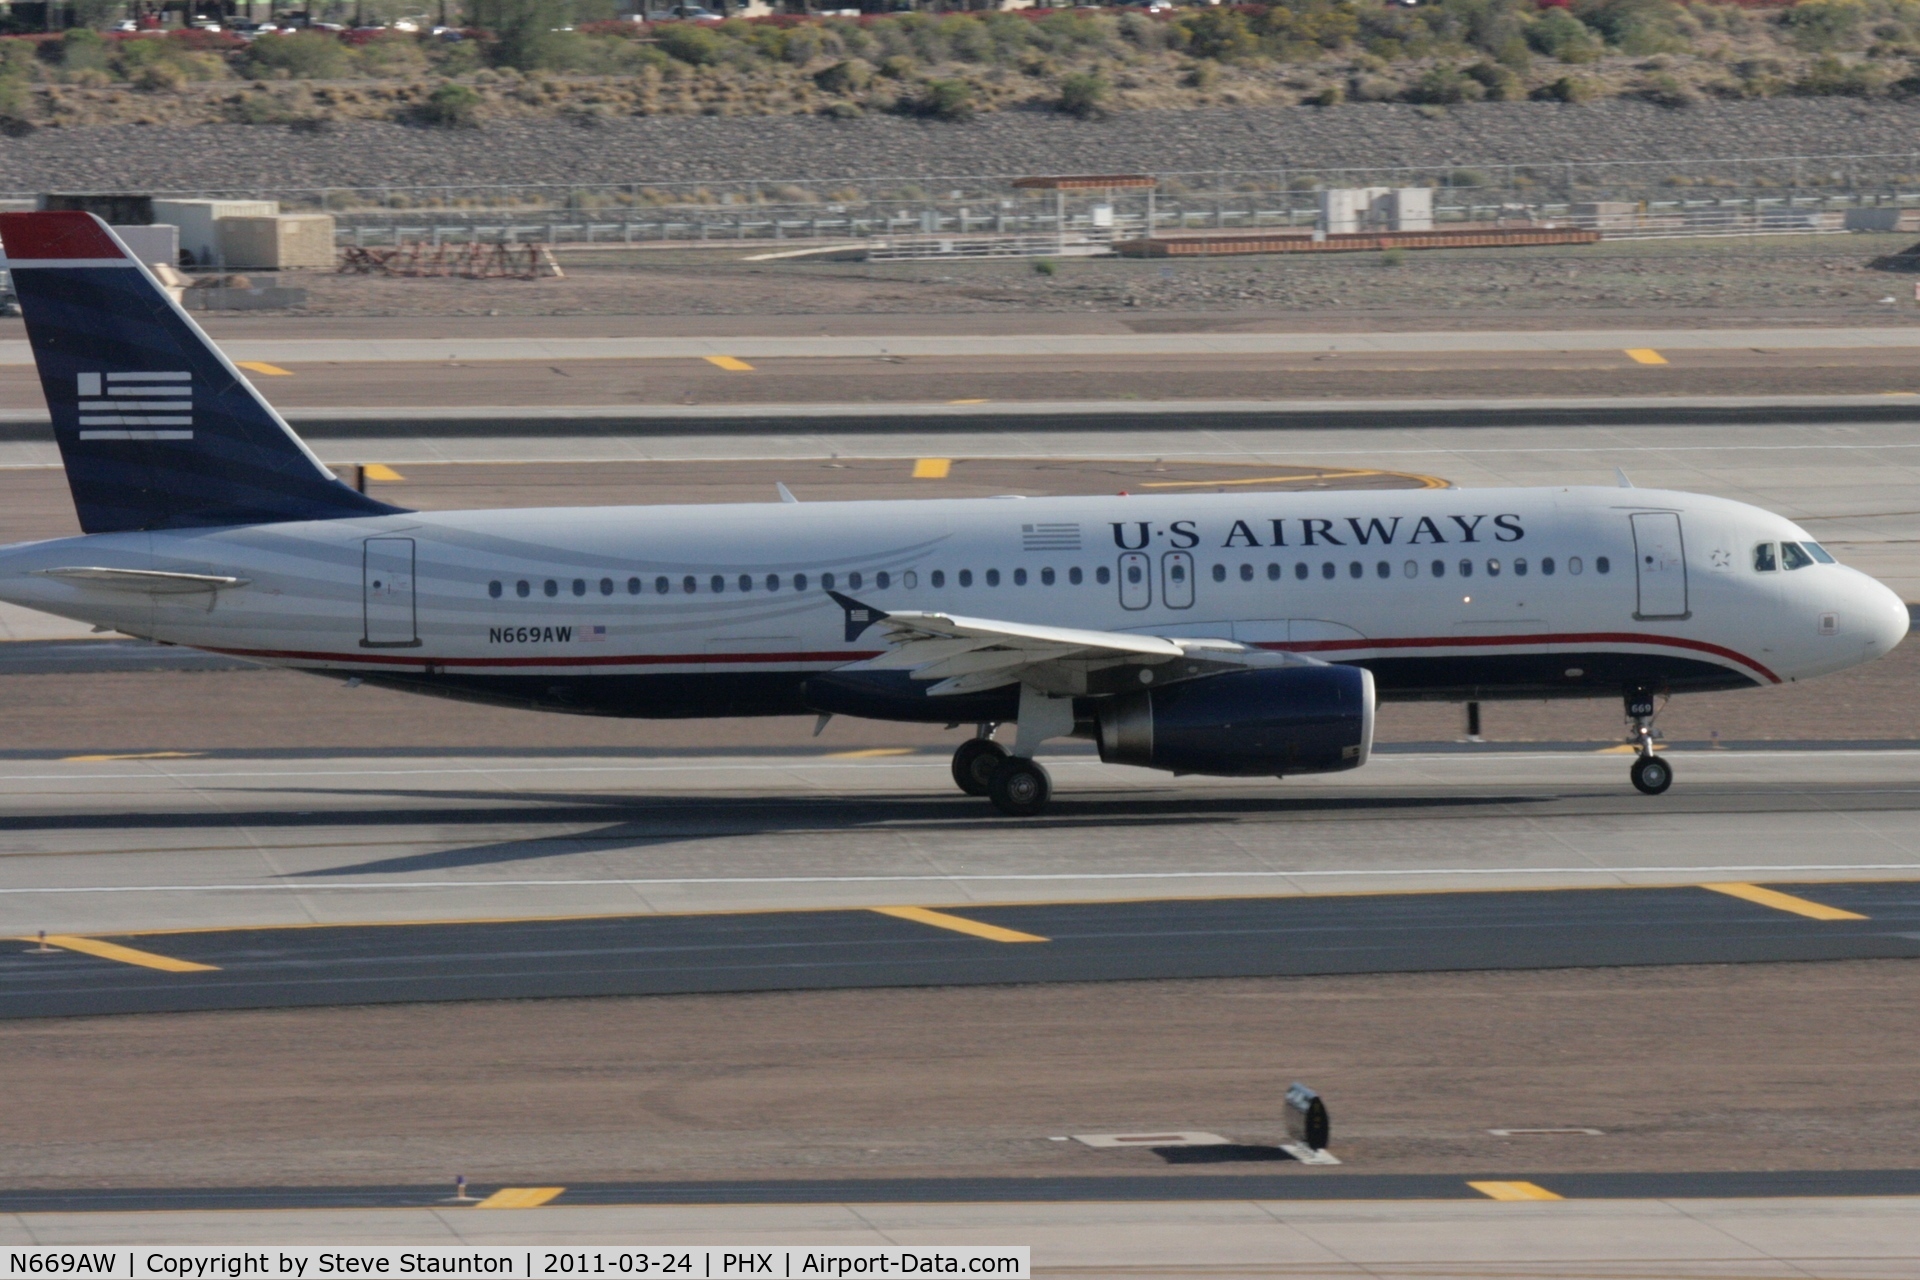 N669AW, 2002 Airbus A320-232 C/N 1792, Taken at Phoenix Sky Harbor Airport, in March 2011 whilst on an Aeroprint Aviation tour